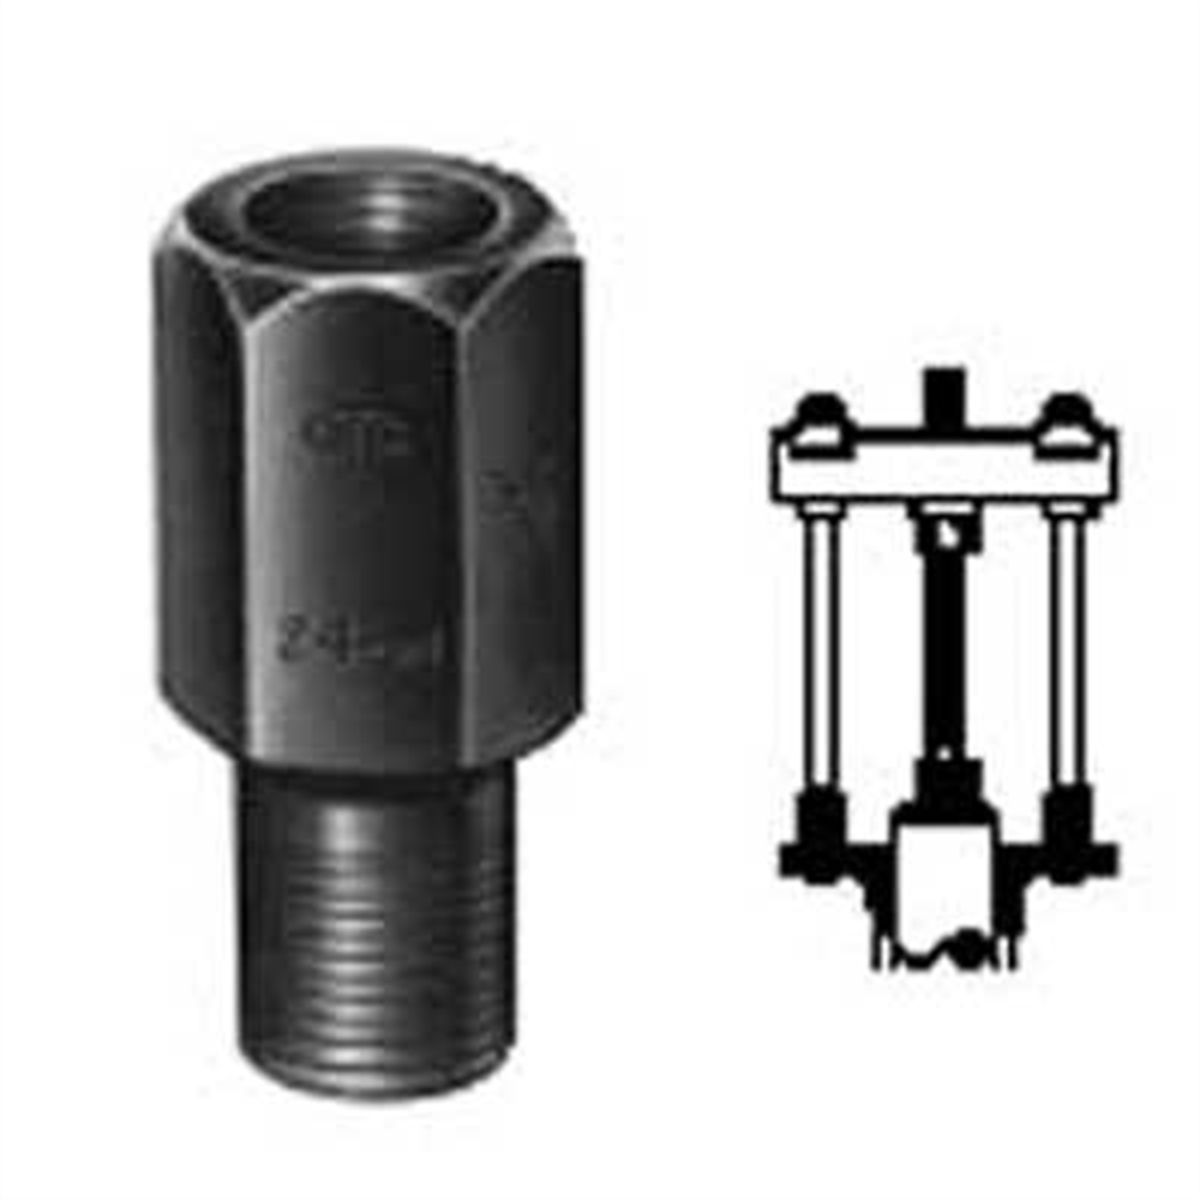 Puller Adapter 1 1/4-7 Female To 1-14 Male